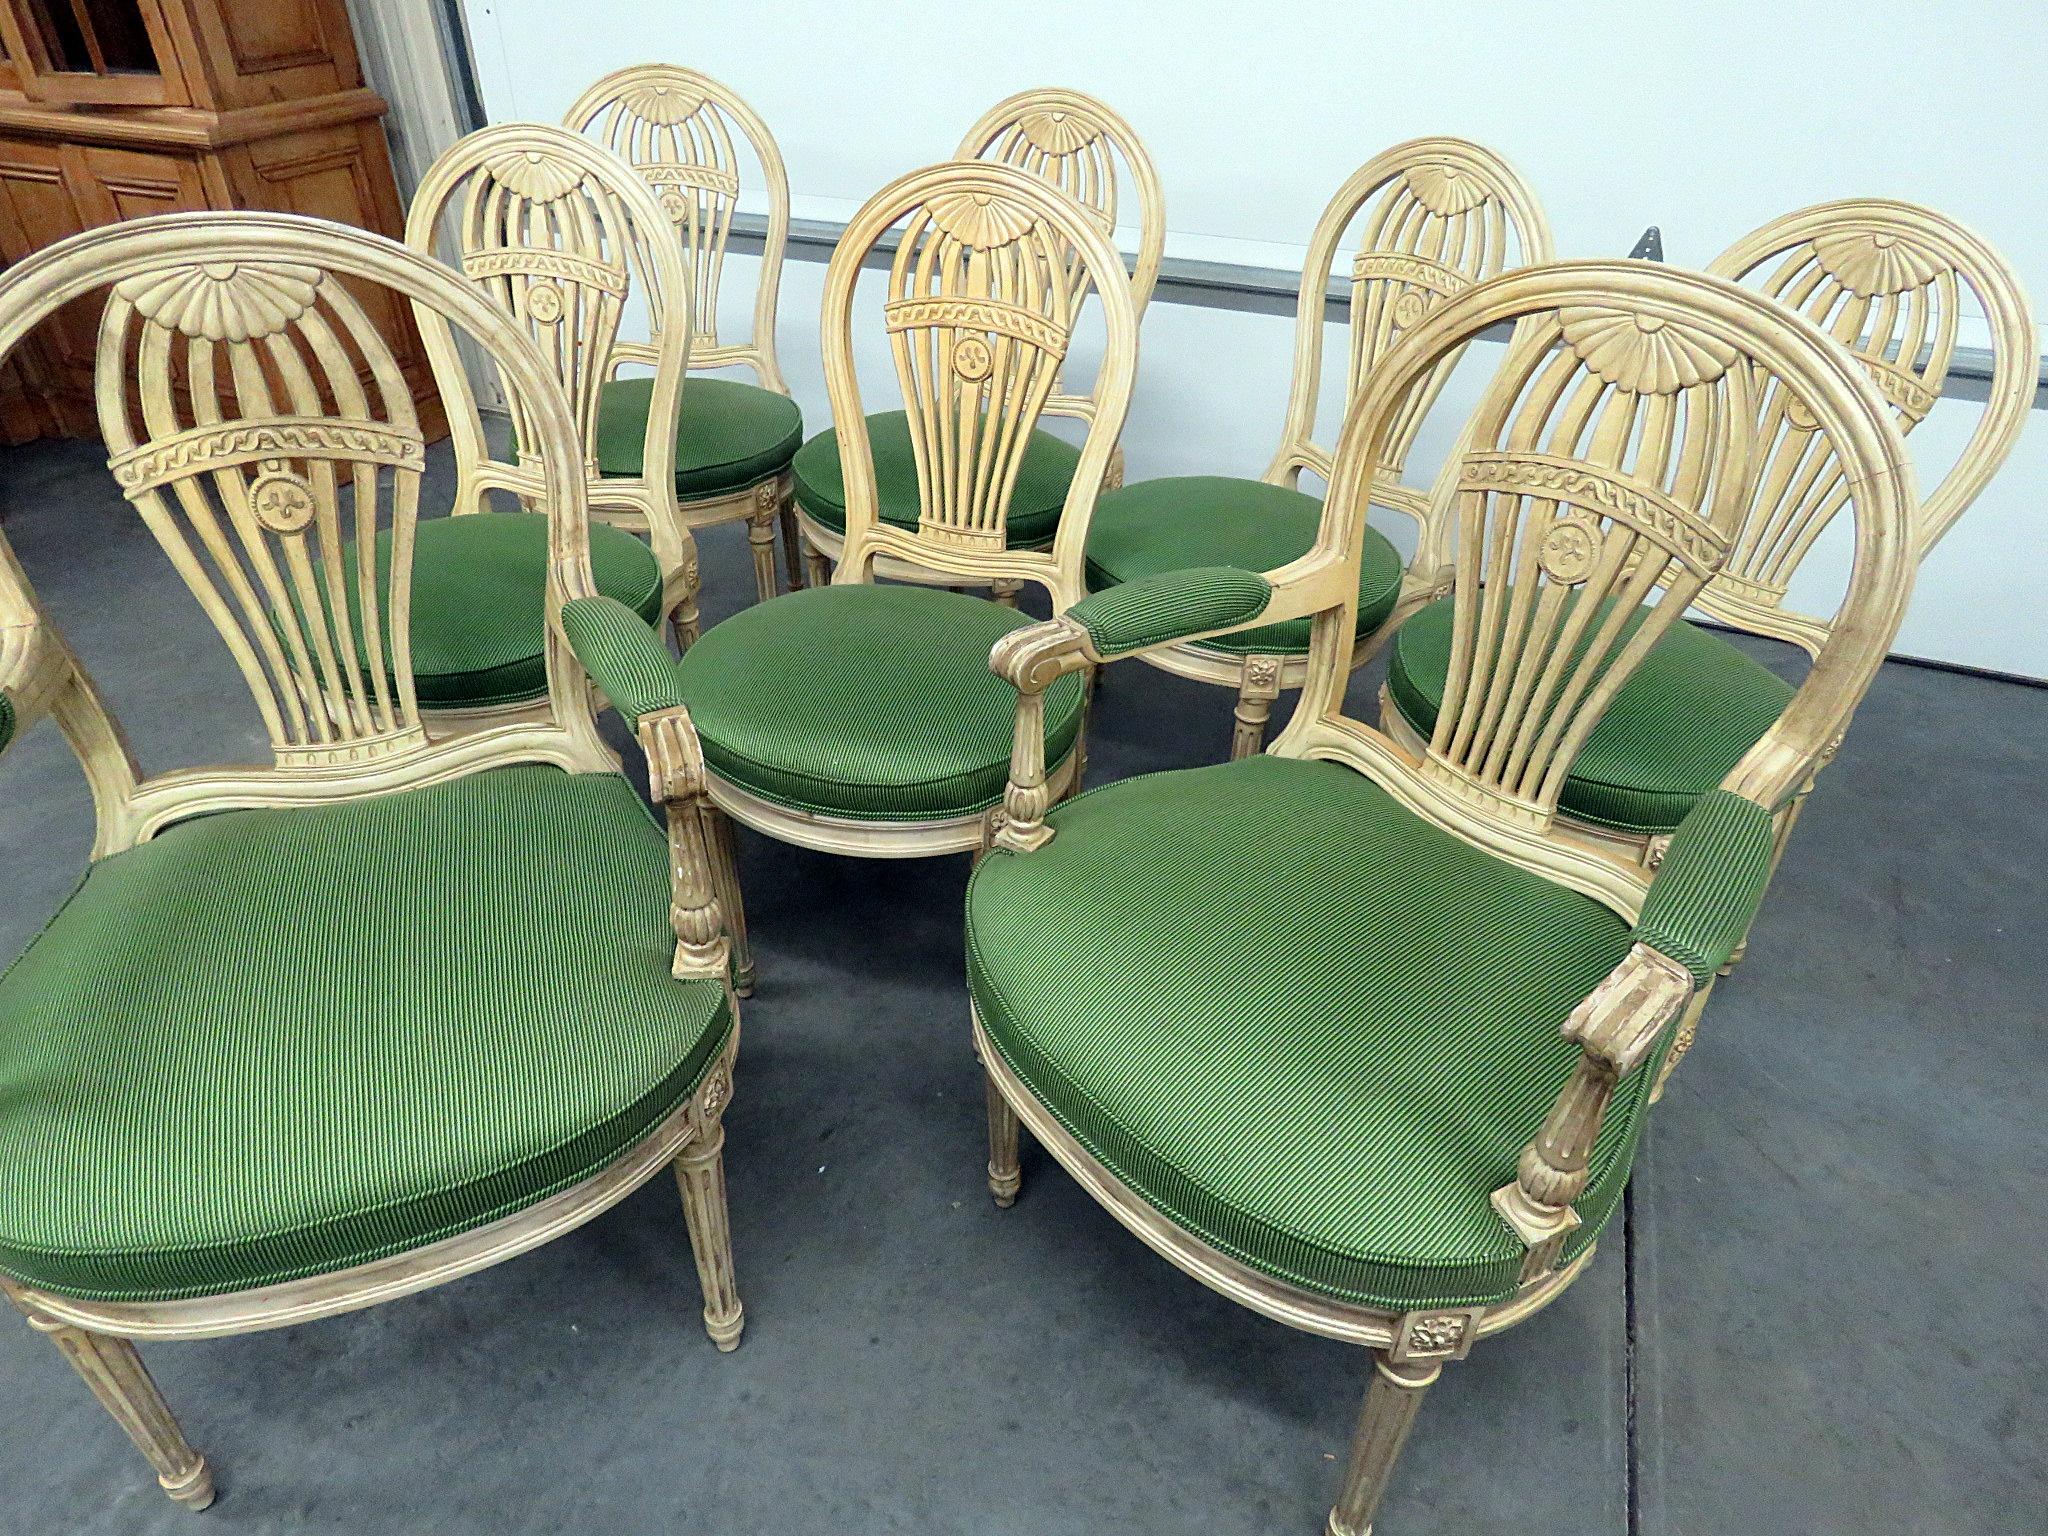 Set of 8 Maison Jansen style distressed paint decorated dining chairs. 6 side chairs measure 36